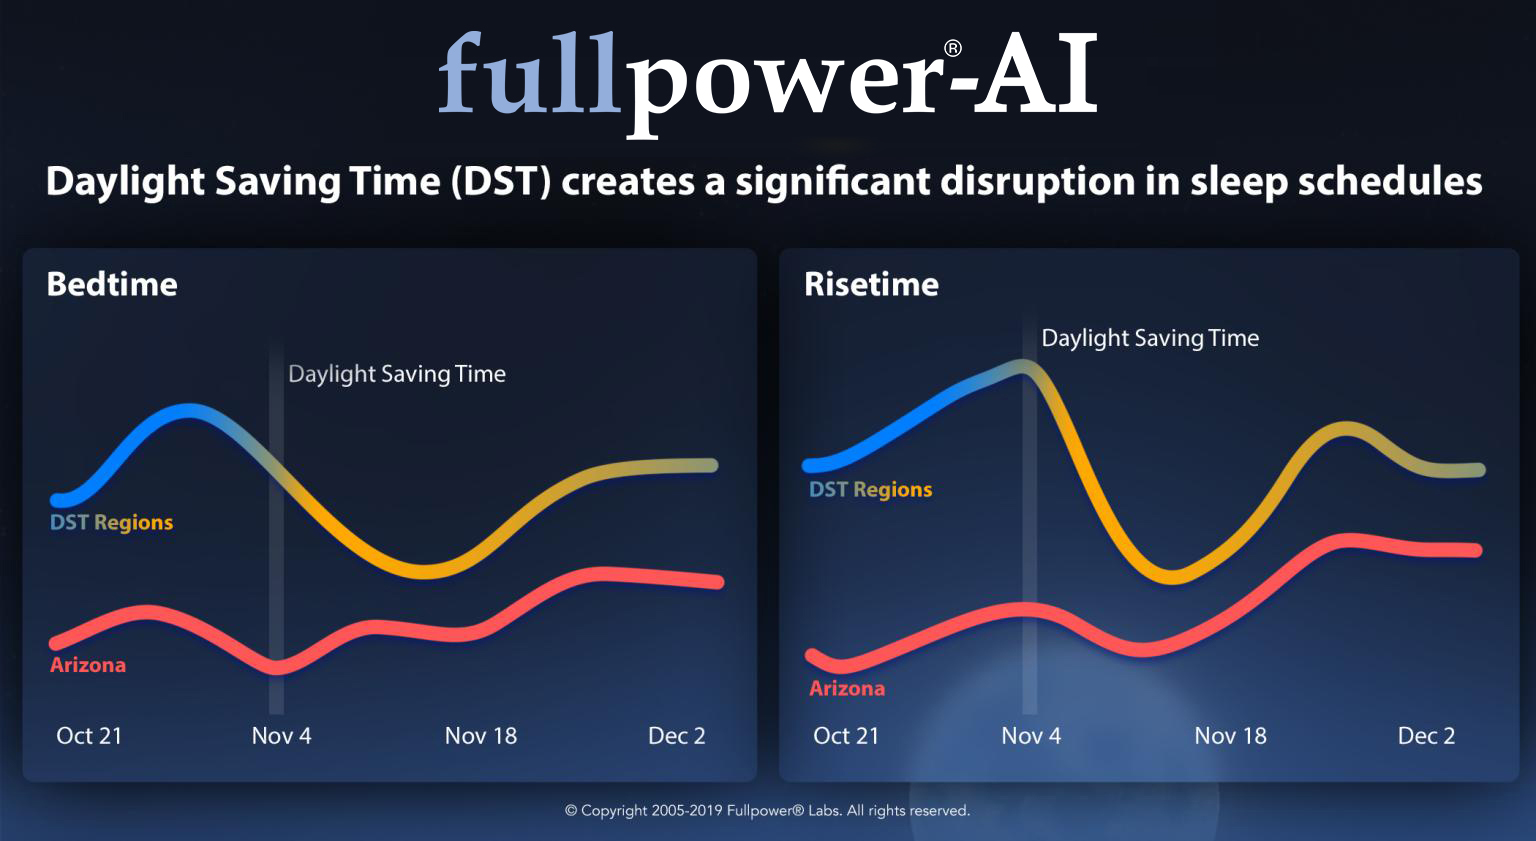 Daylight Saving Time (DST) creates a significant disruption in sleep schedules